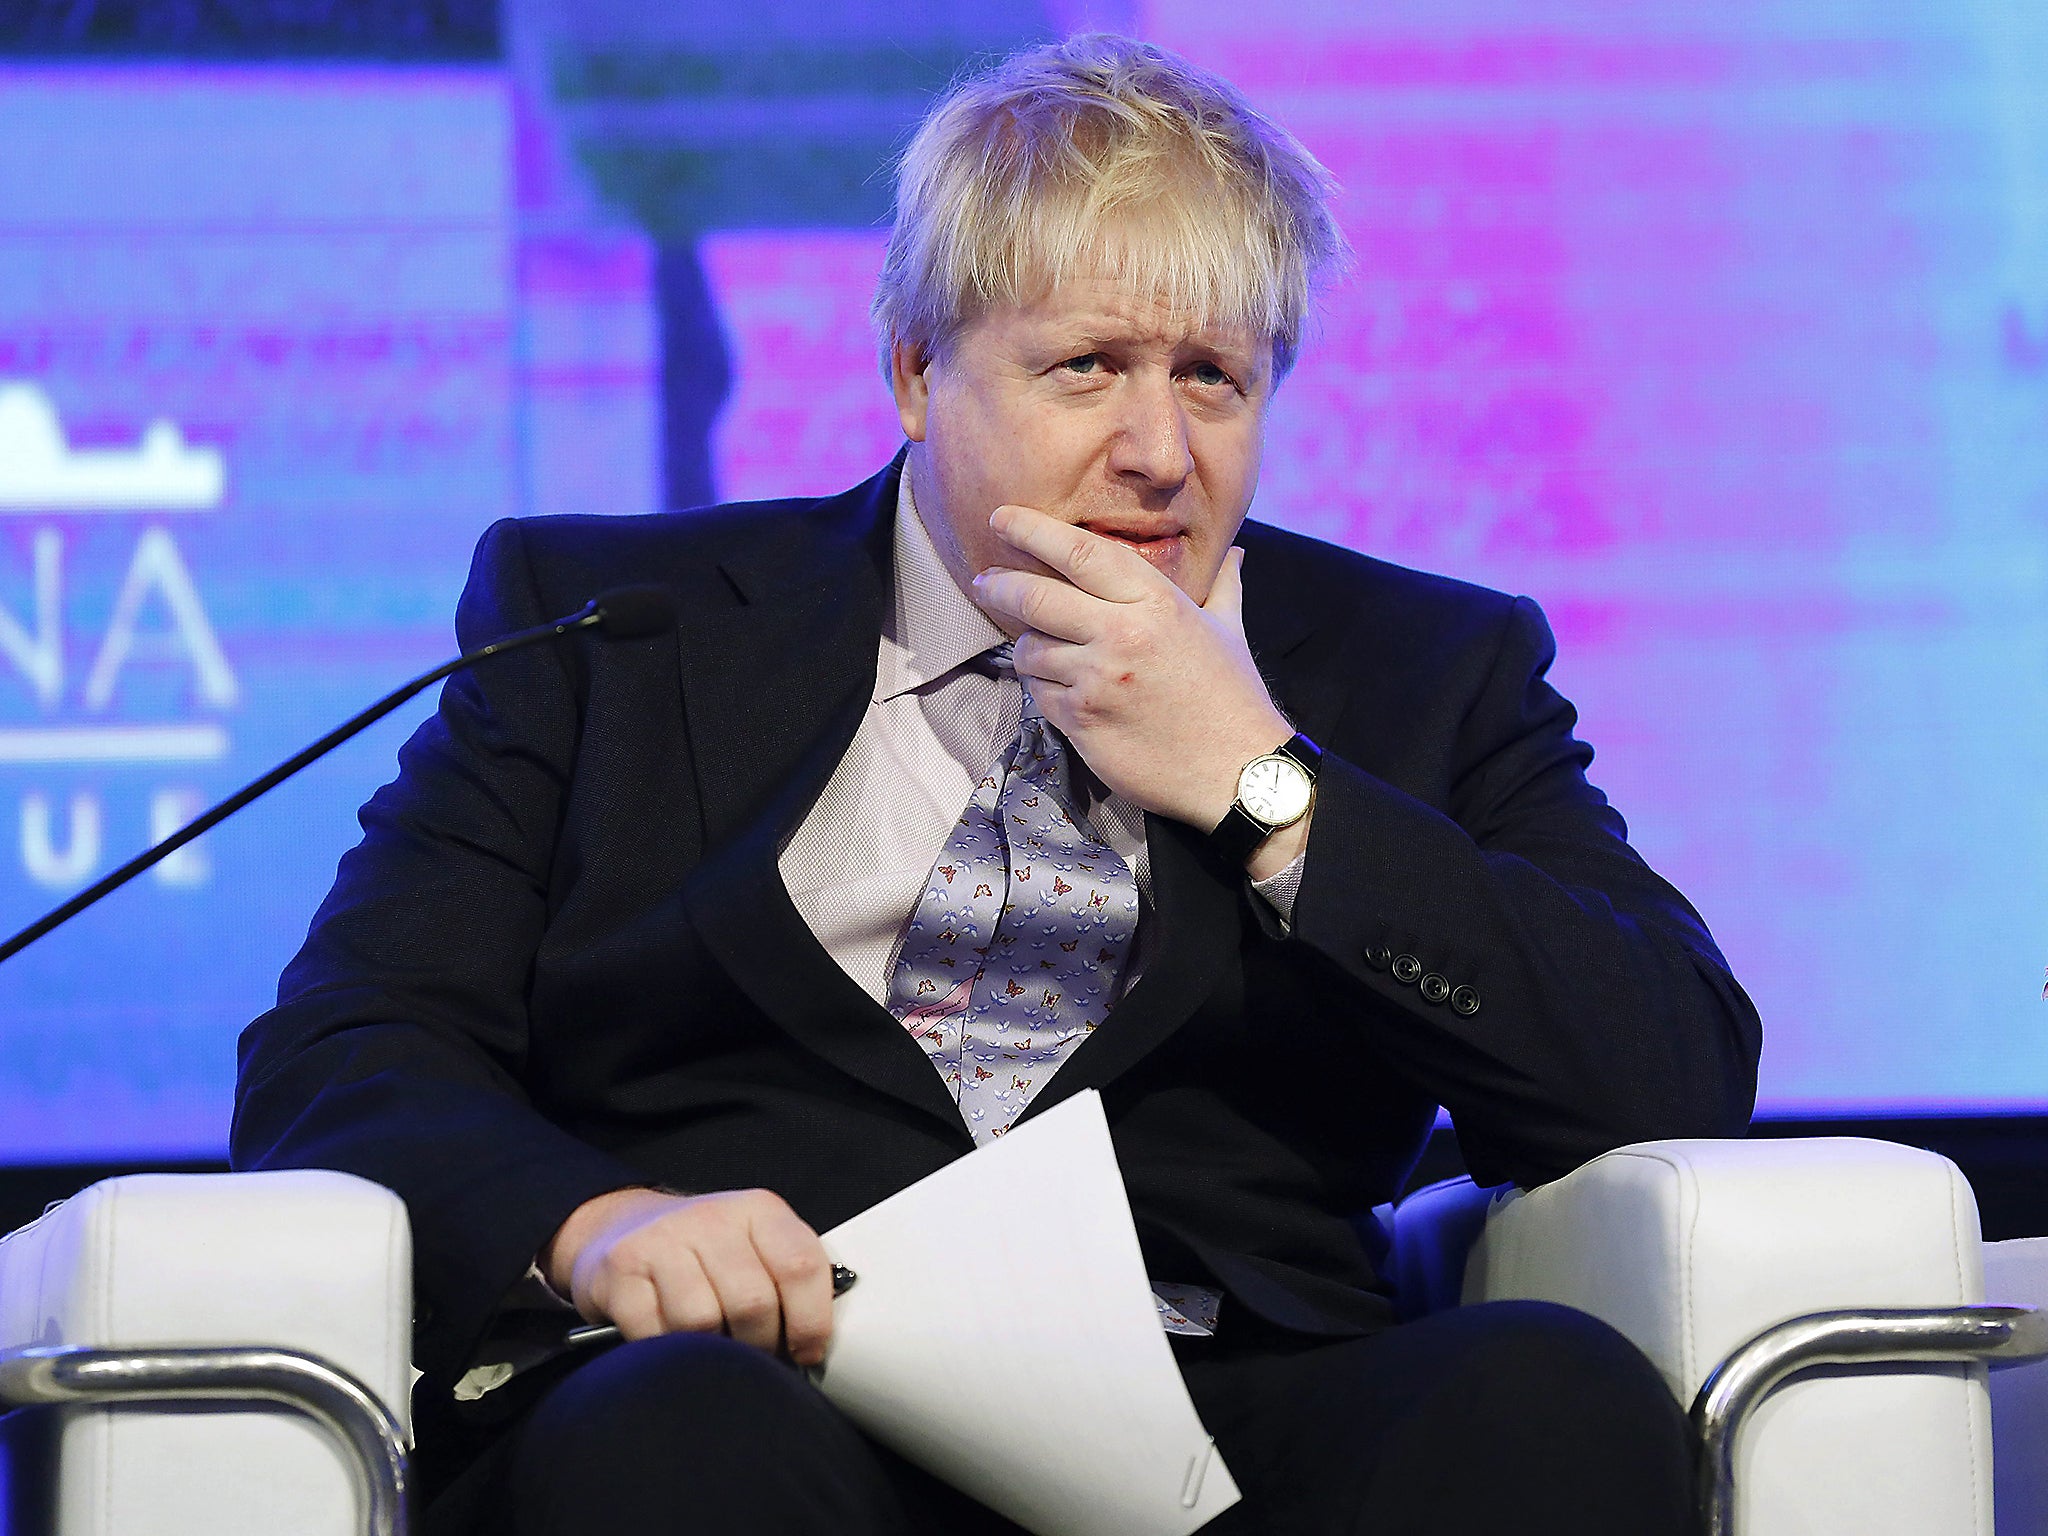 British Foreign Secretary Boris Johnson addresses the 2nd Raisina Dialogue event in New Delhi, India. Johnson is on a three-day visit to India with the aim of strengthening bilateral ties between the two countries